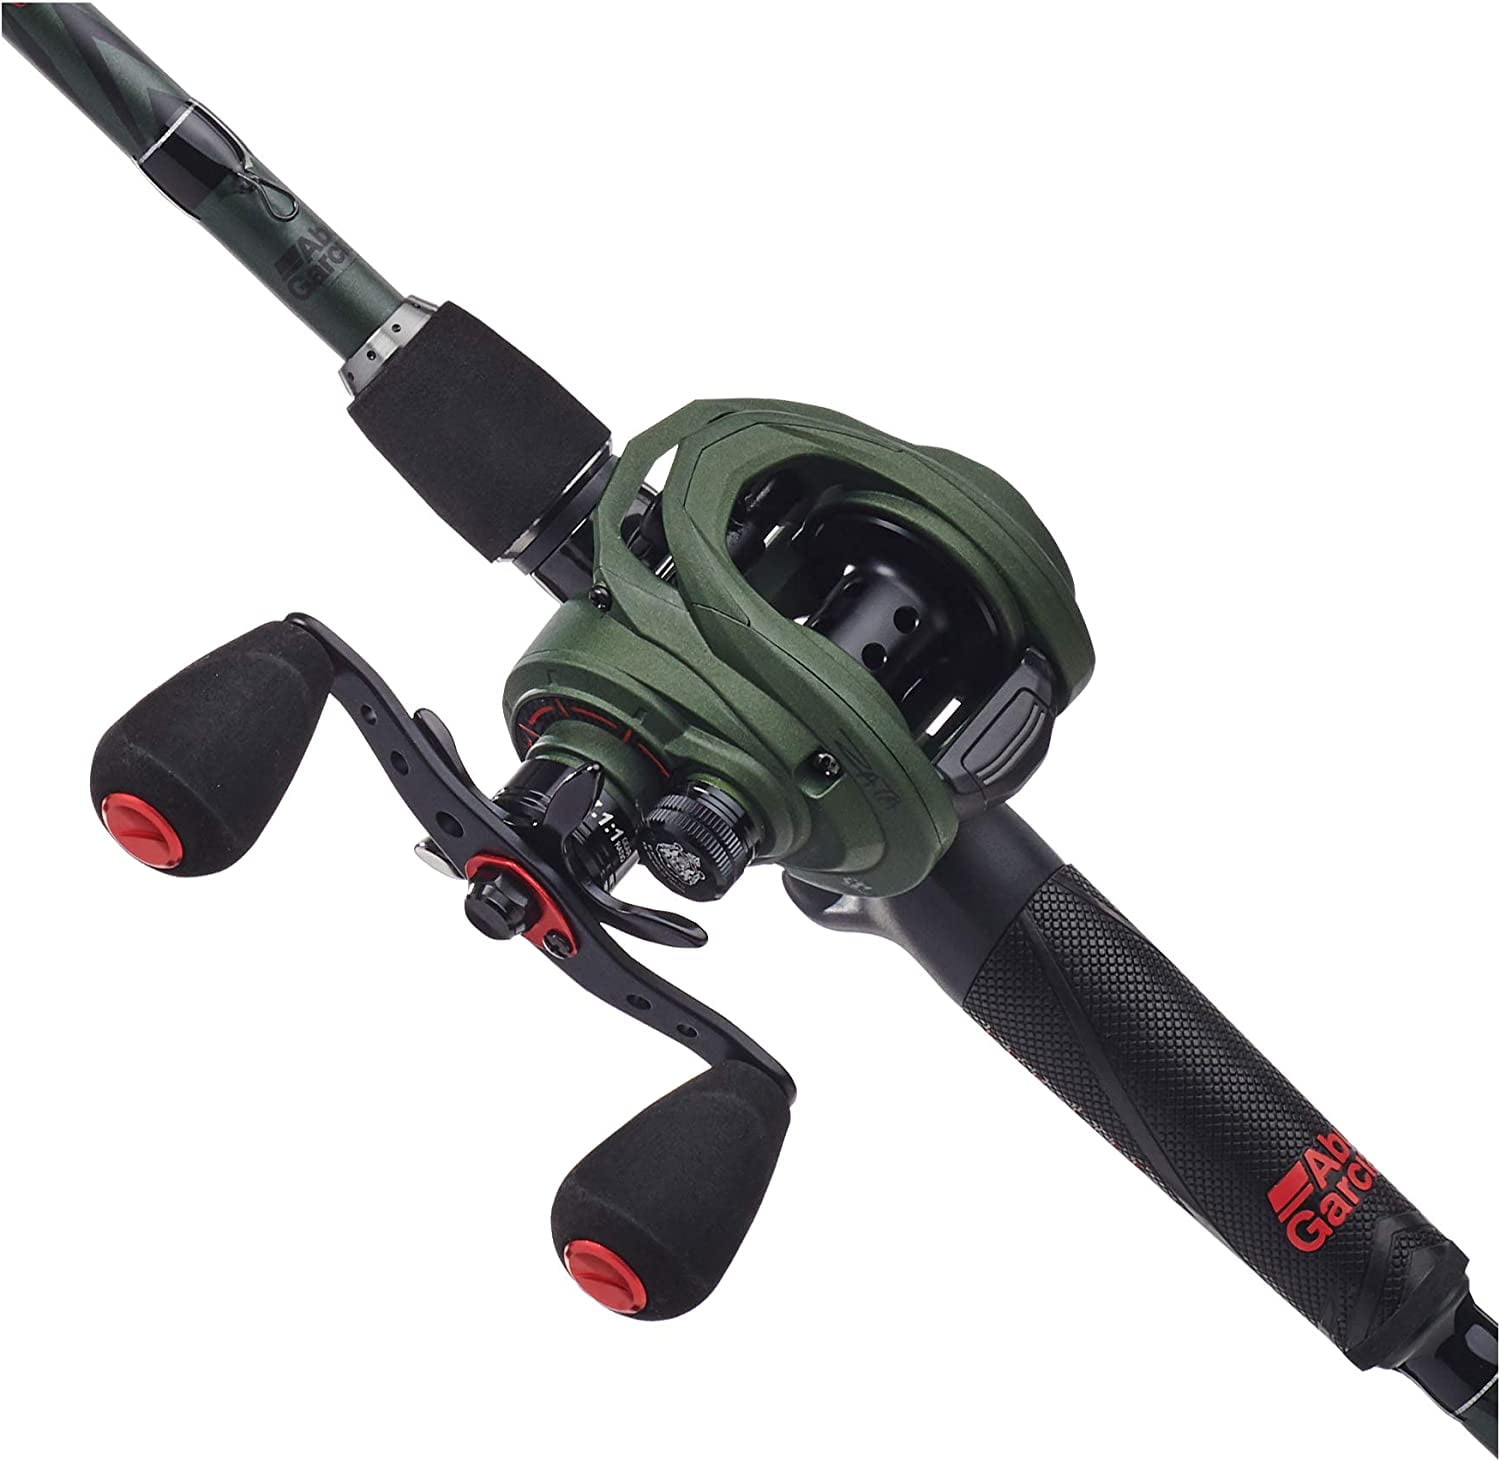 Buy Abu Garcia Zata Baitcast Low Profile Reel and Fishing Rod Combo, 7'3 -  Heavy - 1pc Online at Low Prices in India 